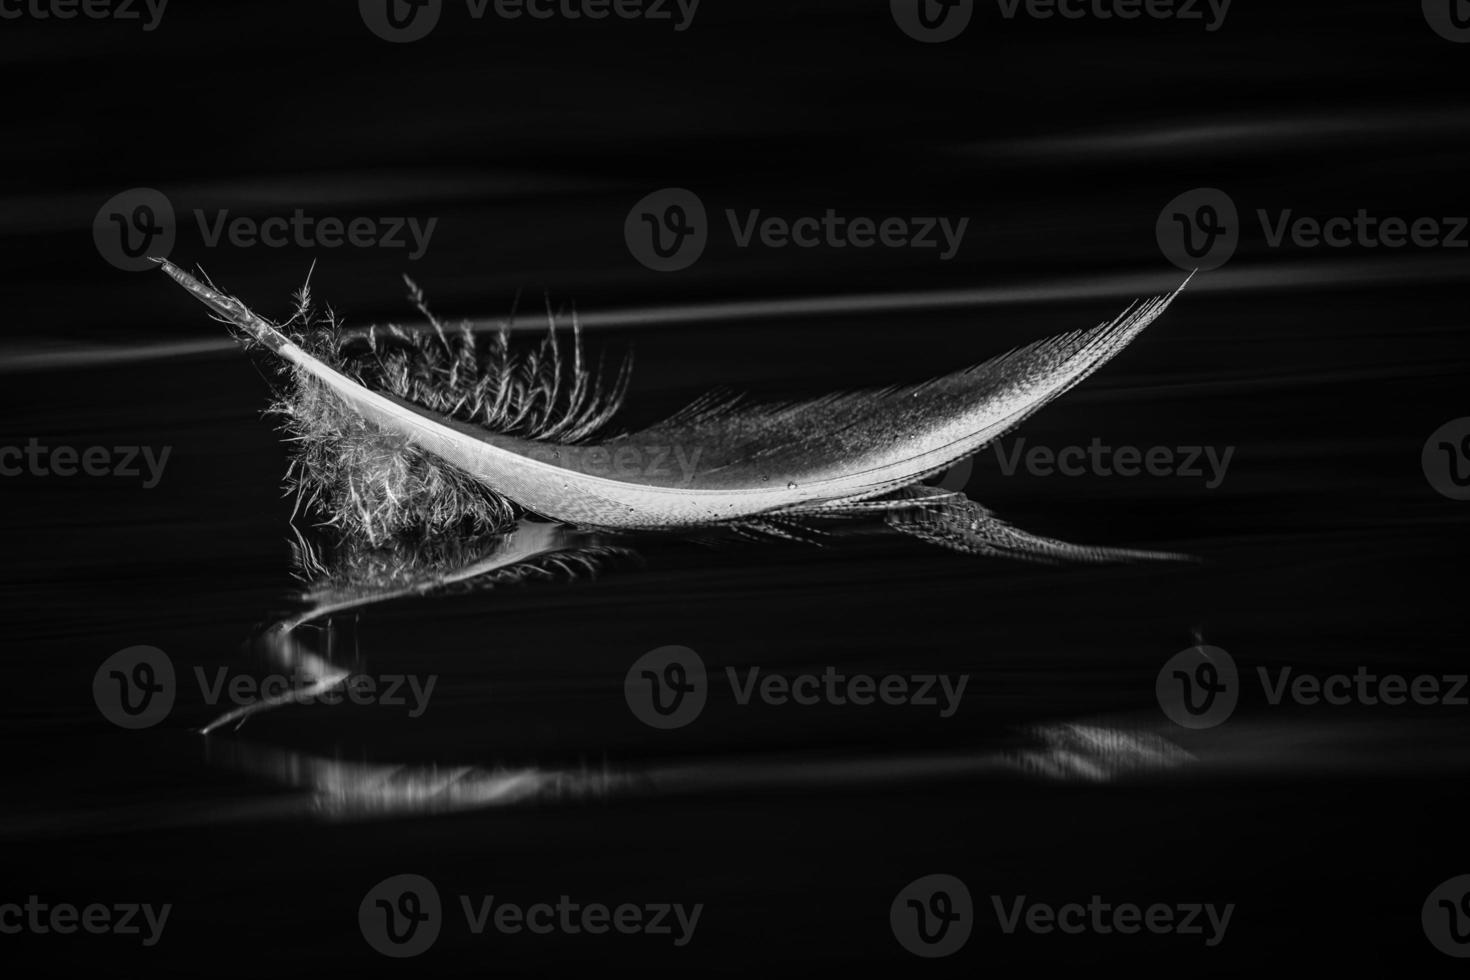 Bird Feather in Black and White photo